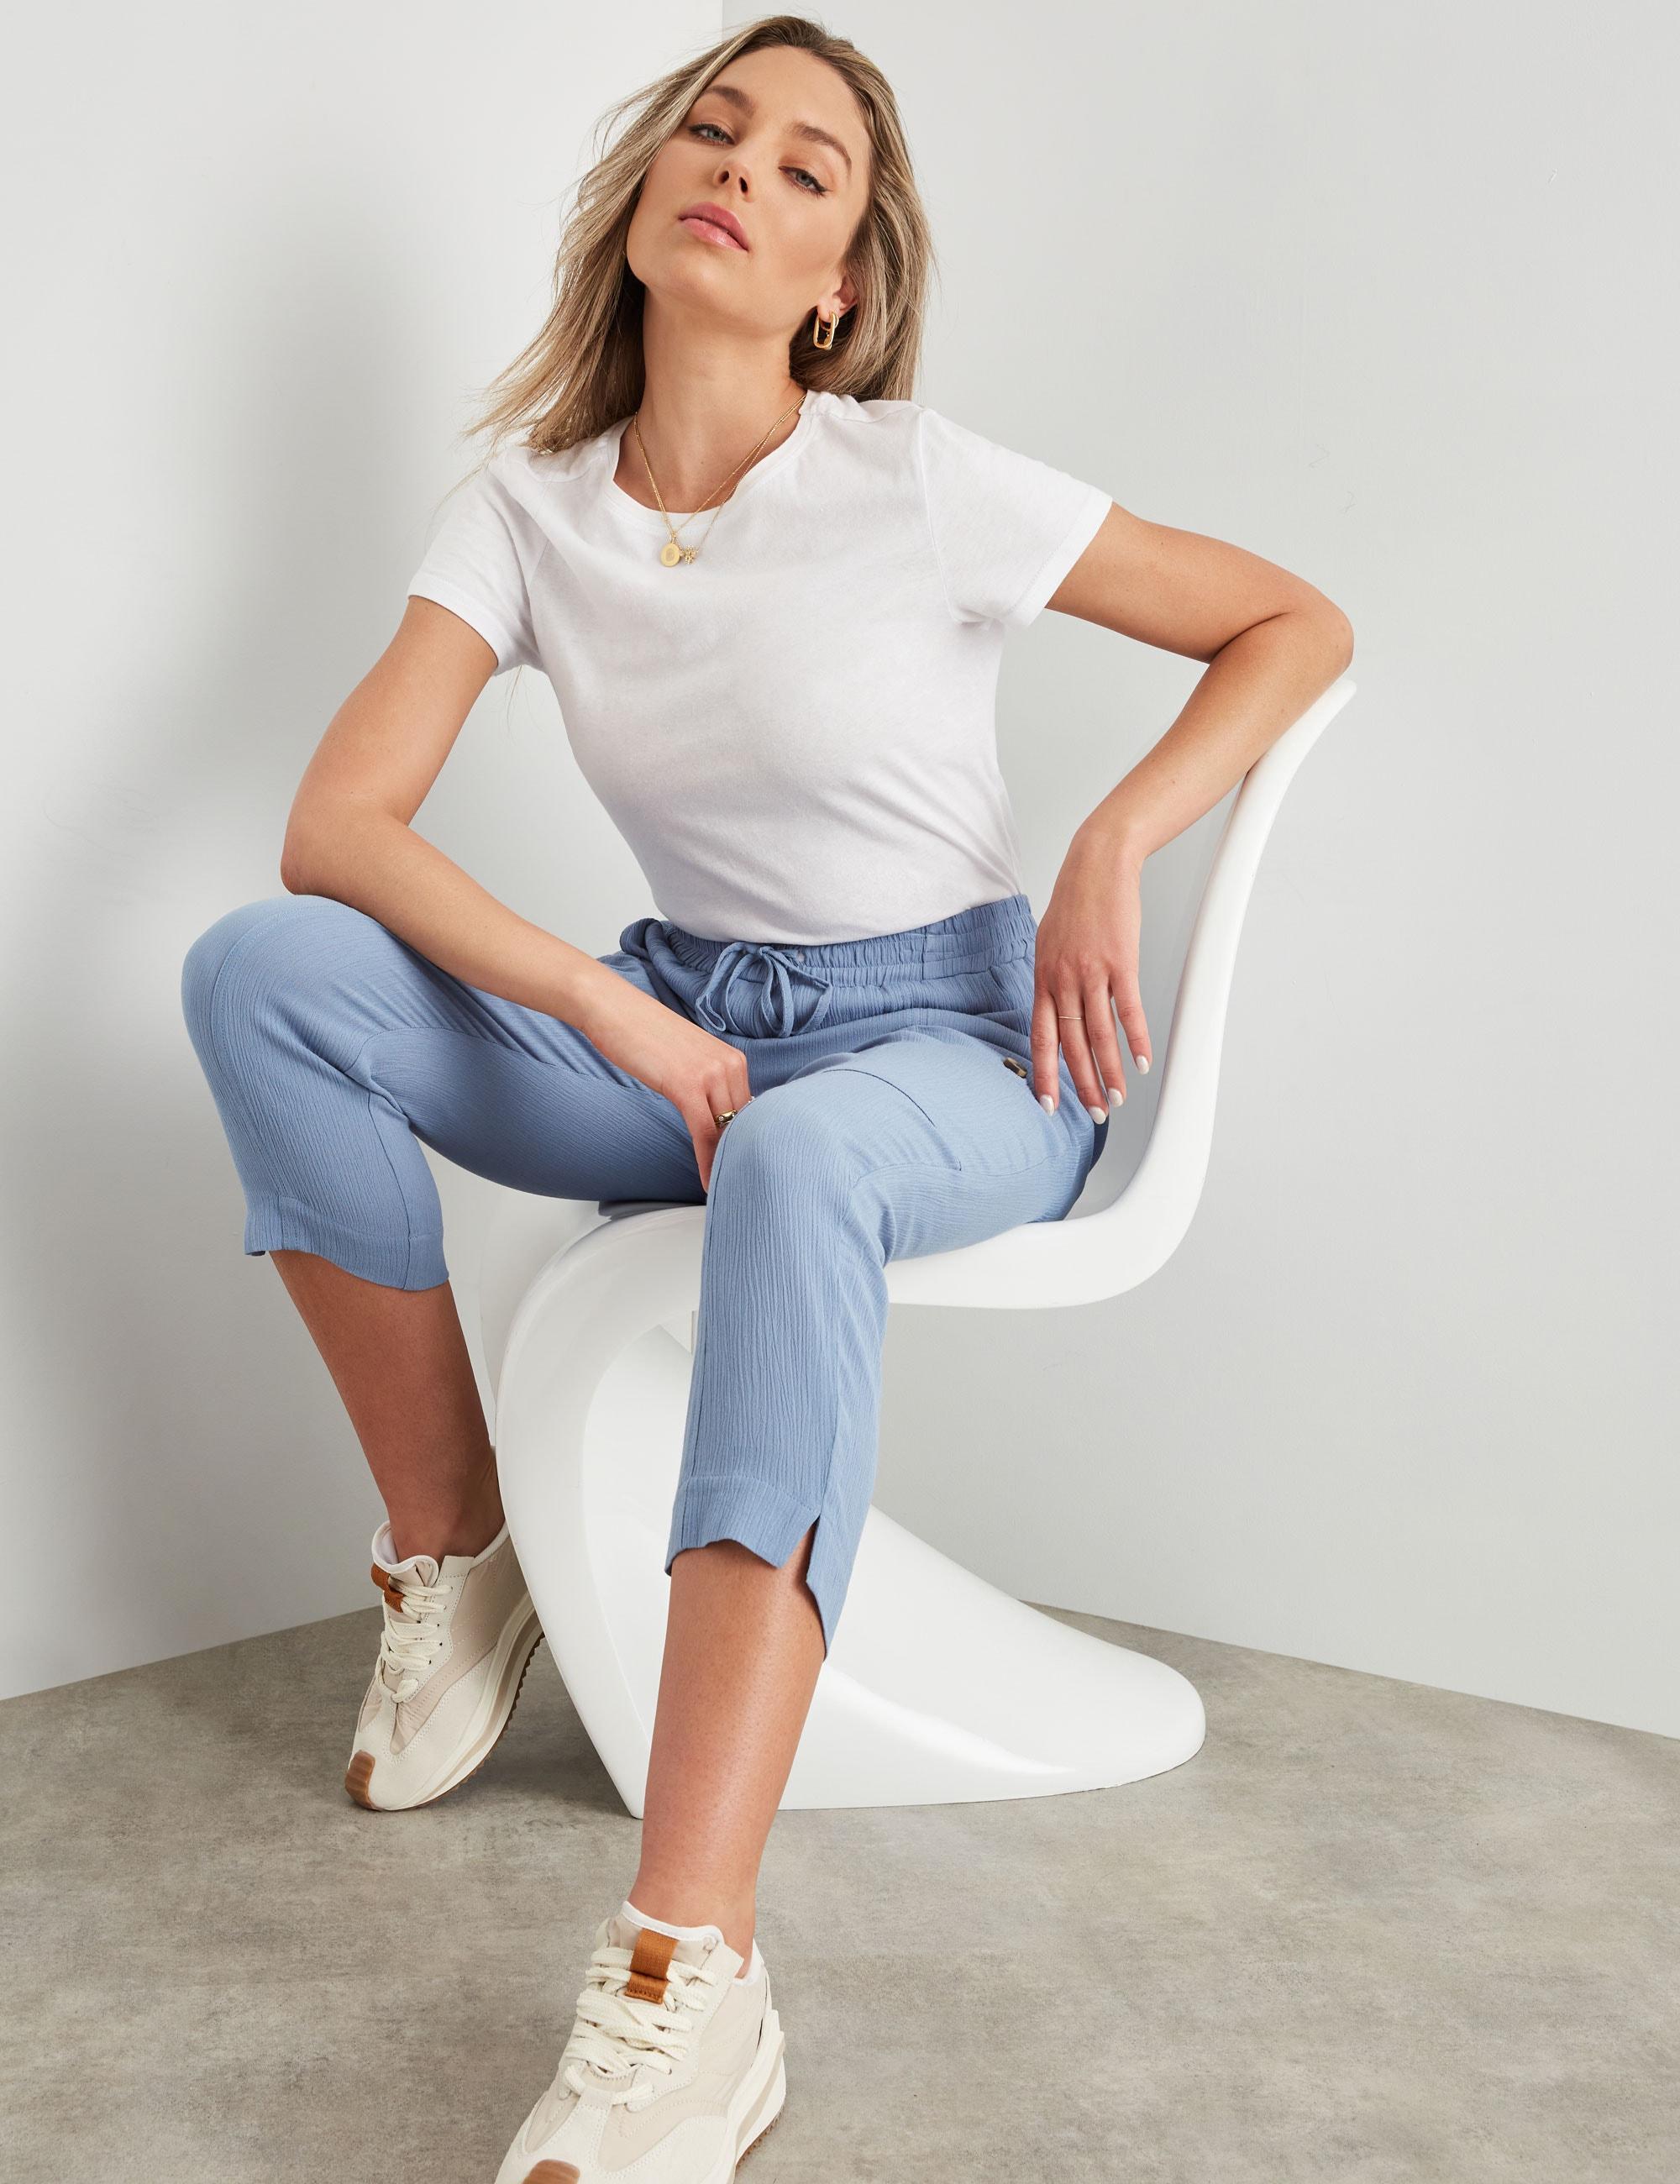 ROCKMANS - Womens Pants - Blue Summer Cropped - Cargo - Casual Fashion Trousers - High Waist - Ankle Length - Elastic Waist - Office Work Clothes